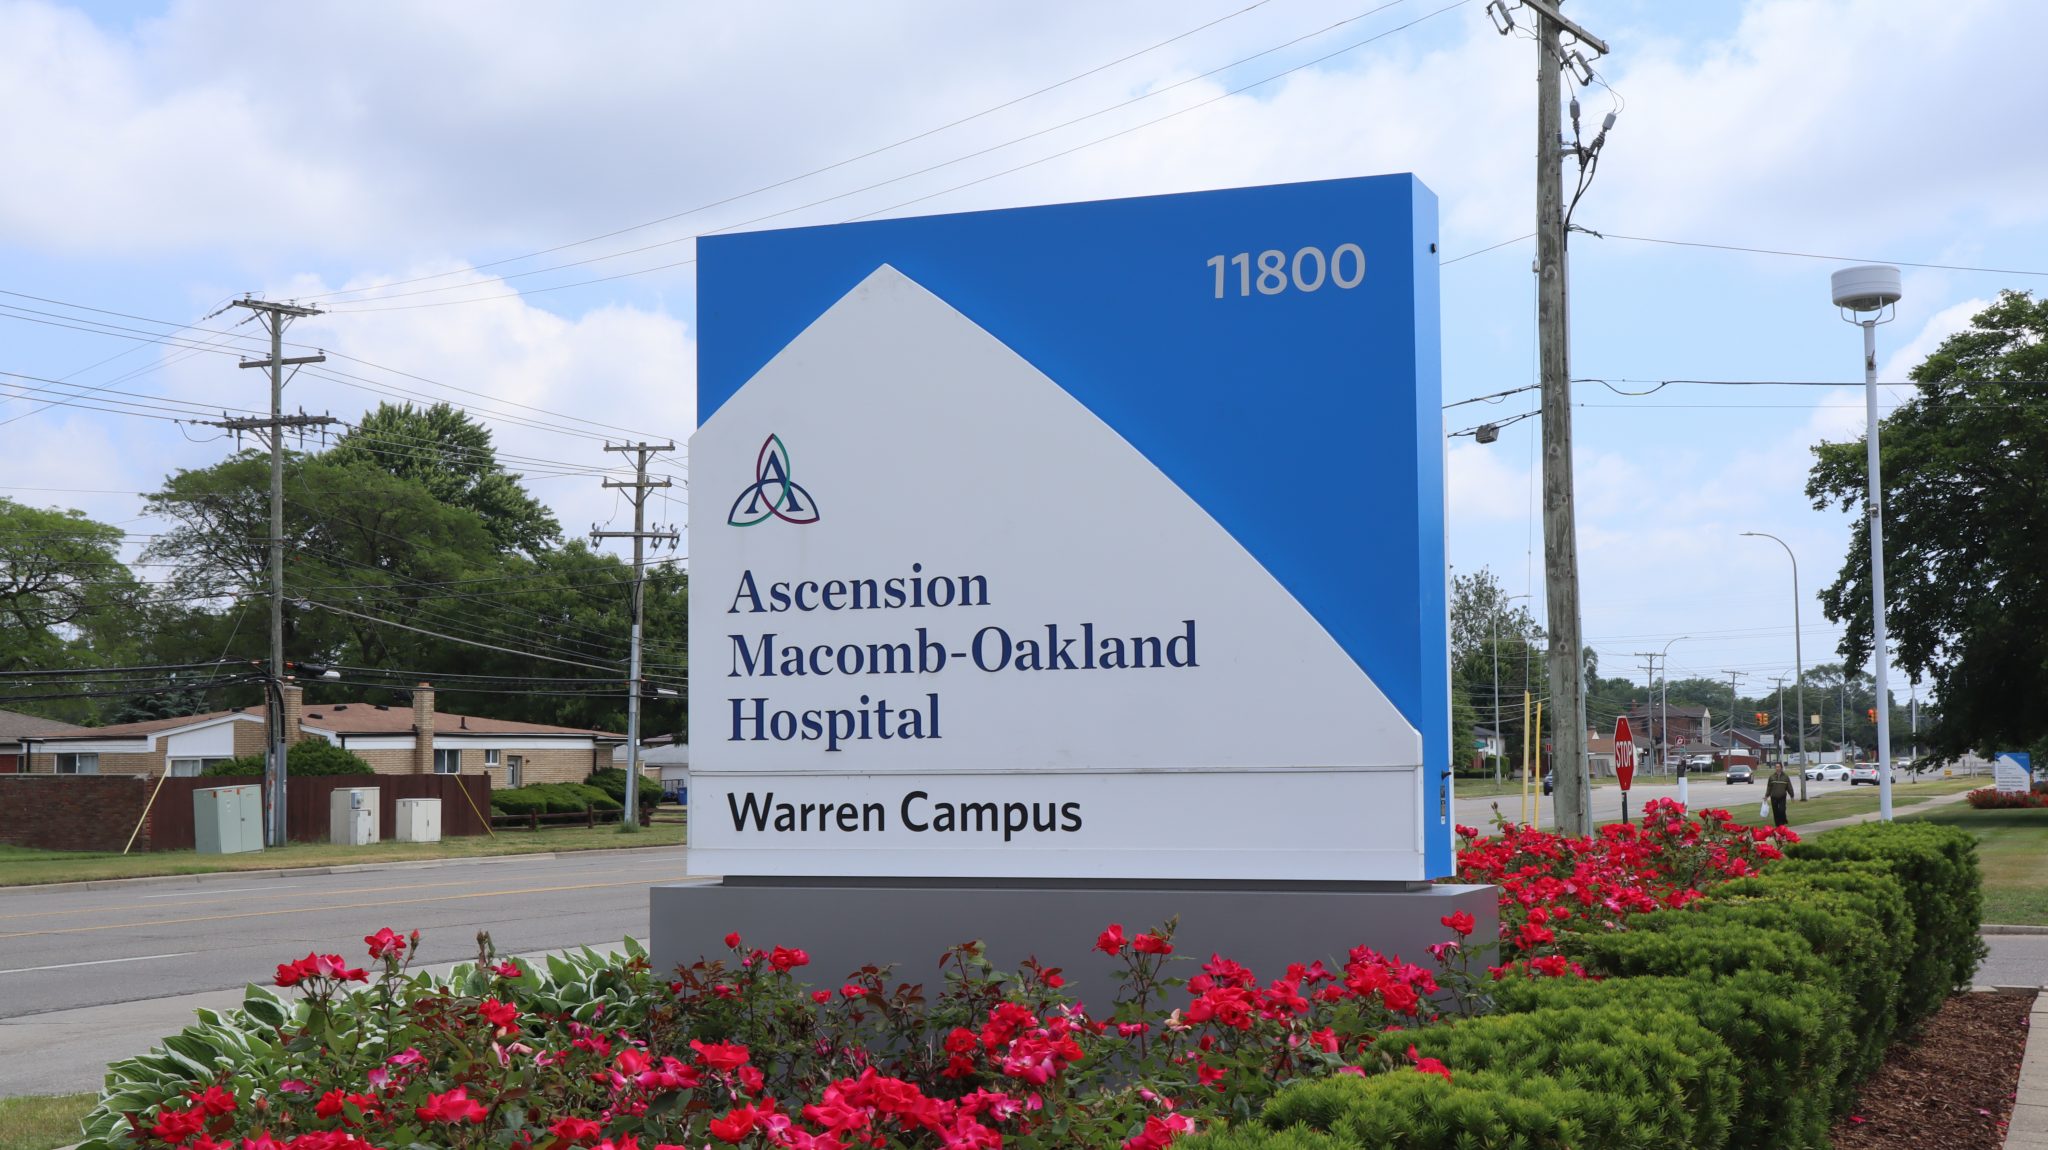 A photo of the road sign for Ascension Macomb Oakland Hospital.